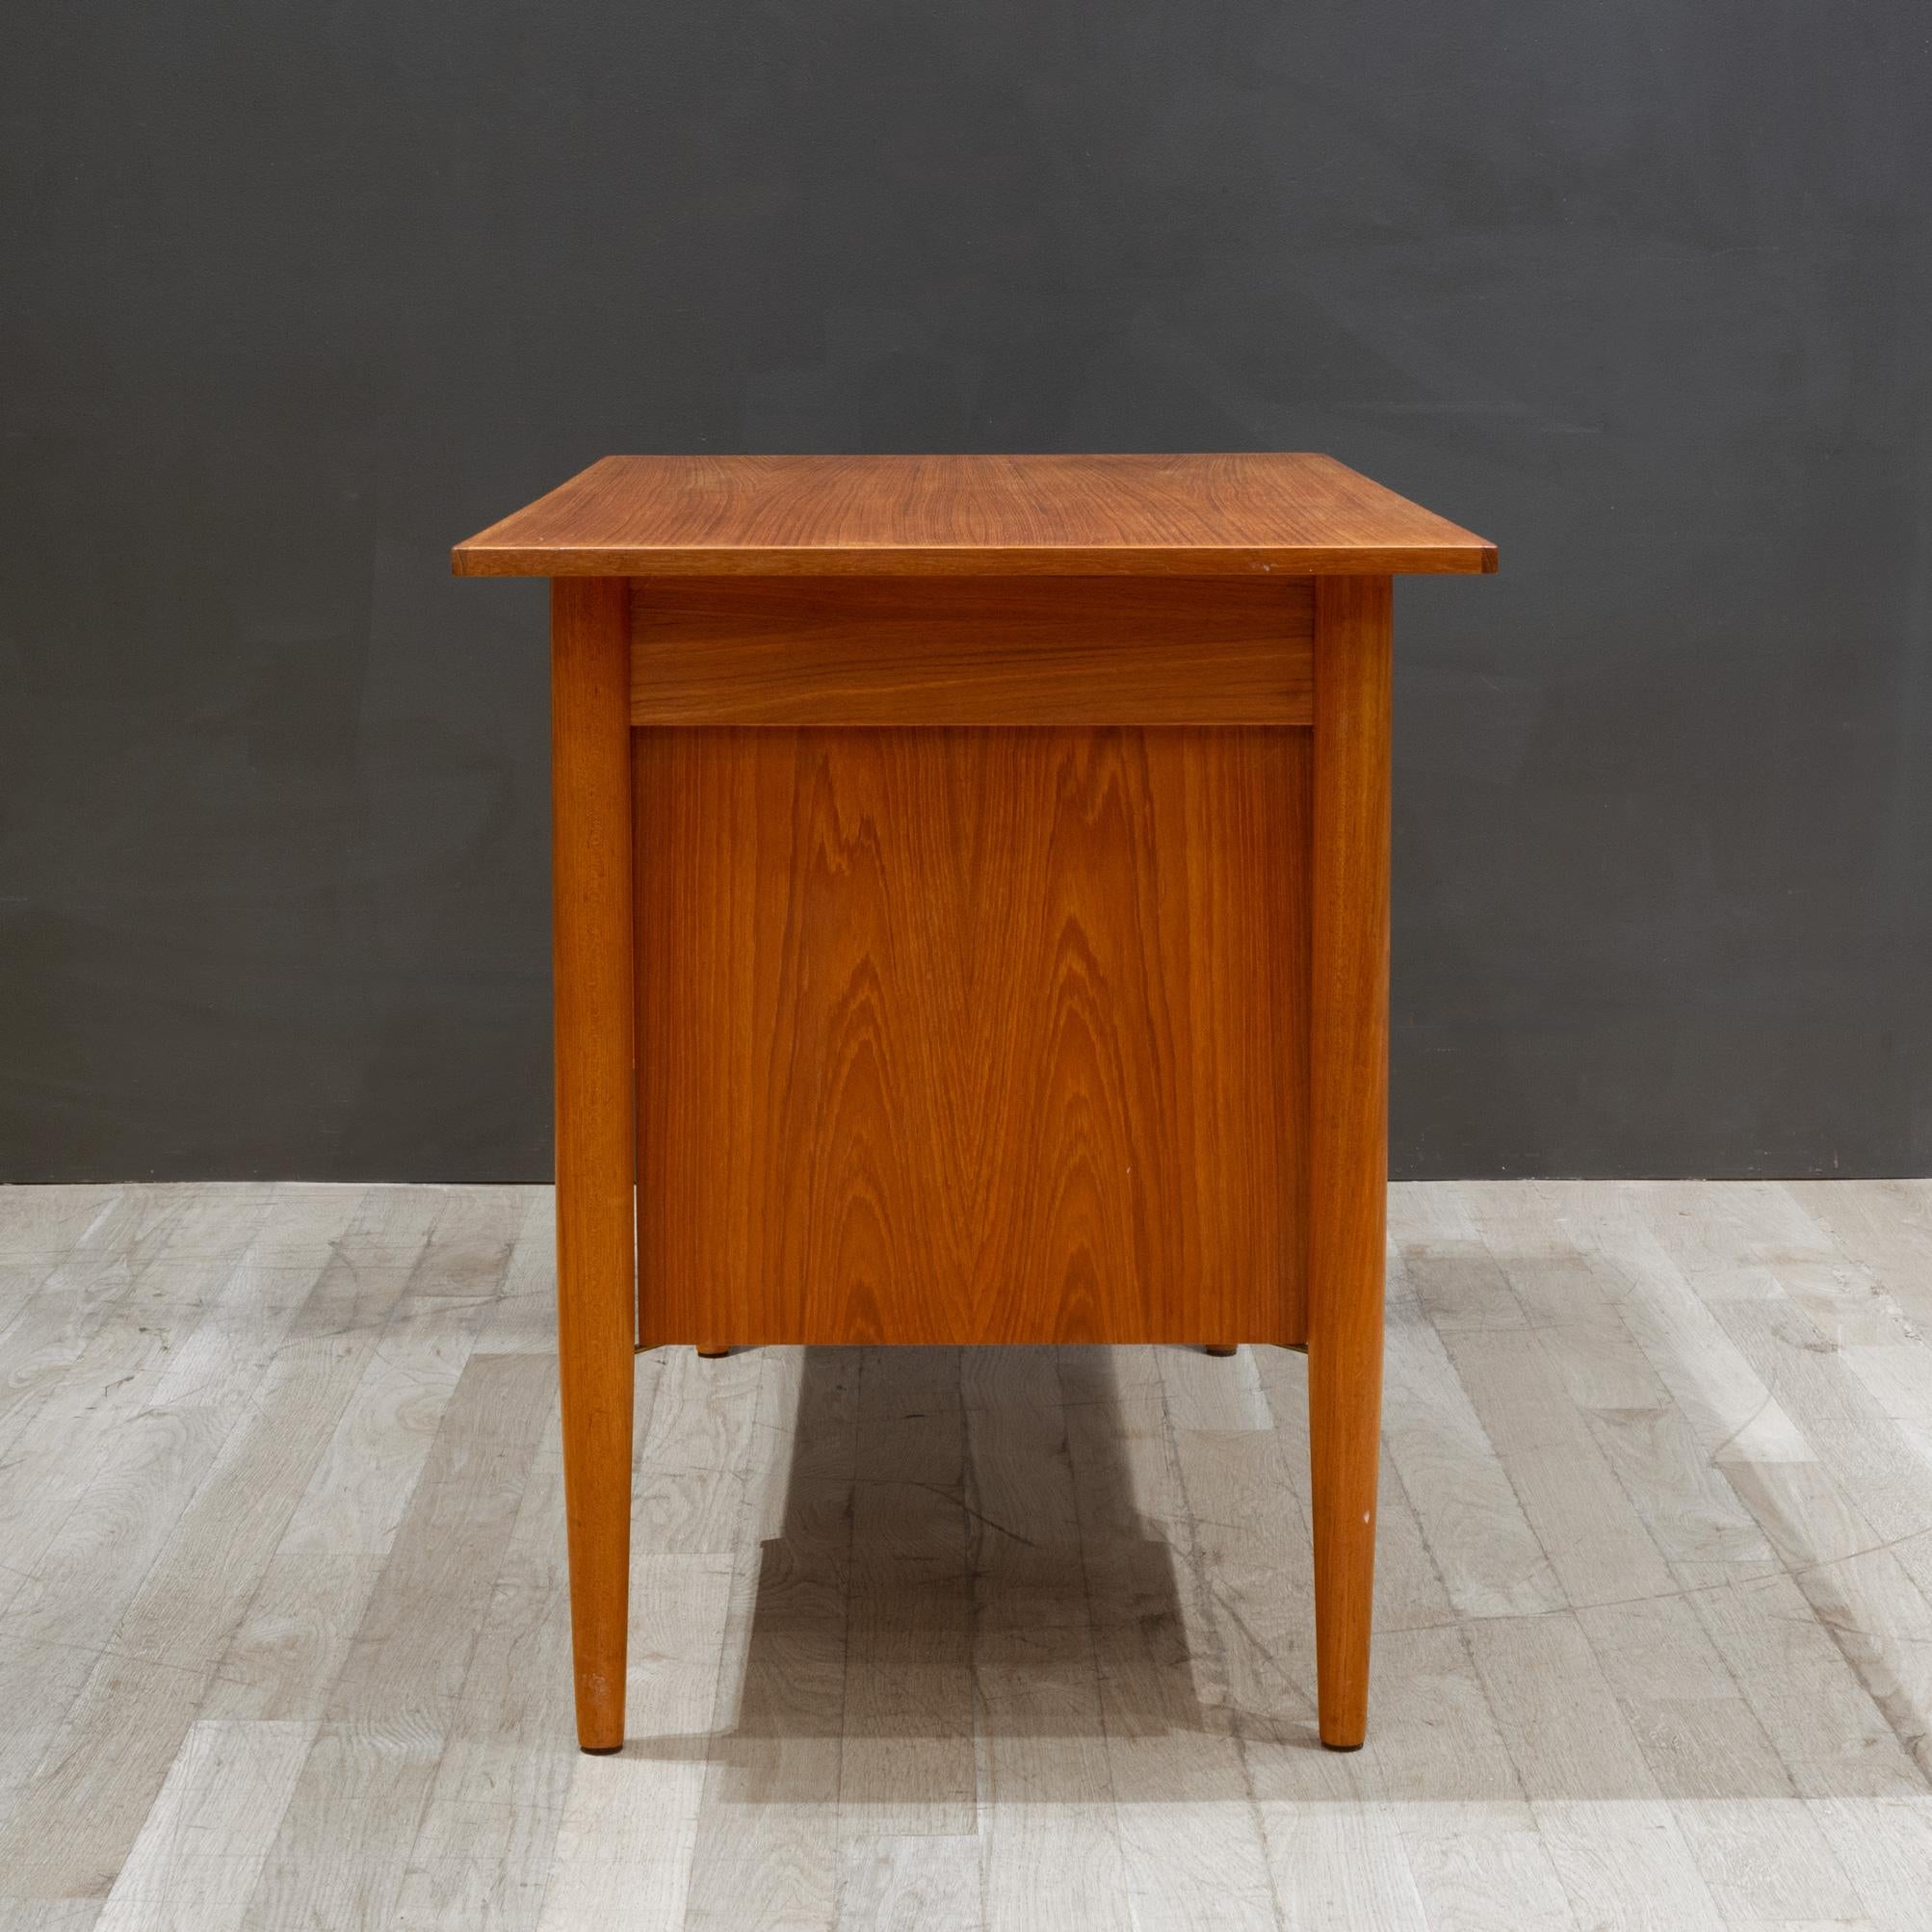 MCM Teak Expandable Desk and Chair by Gunnar Nielsen Tibergaard, Denmark c.1960 In Good Condition For Sale In San Francisco, CA